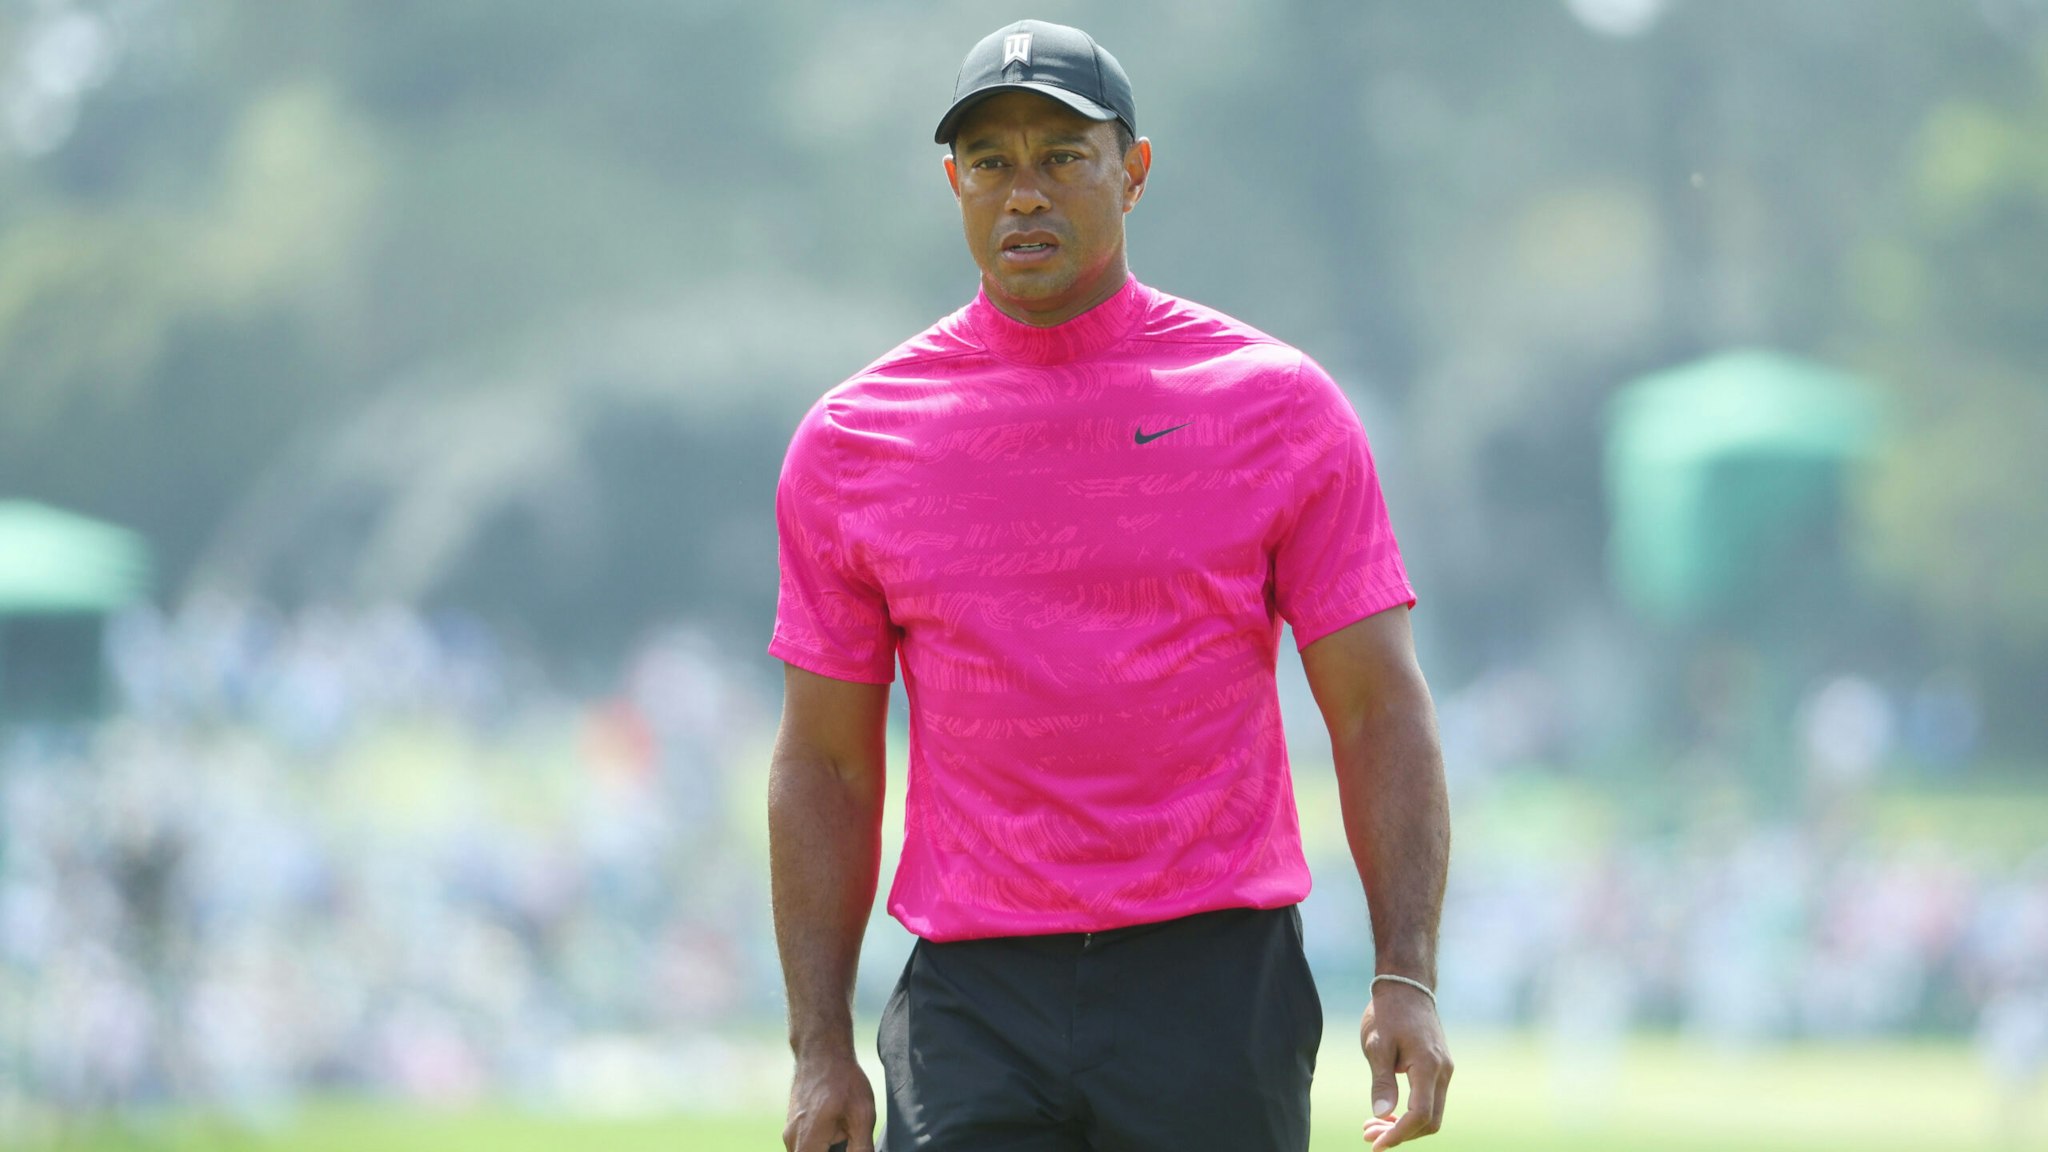 AUGUSTA, GEORGIA - APRIL 07: Tiger Woods lines up a putt on the first green during the first round of the Masters at Augusta National Golf Club on April 07, 2022 in Augusta, Georgia.